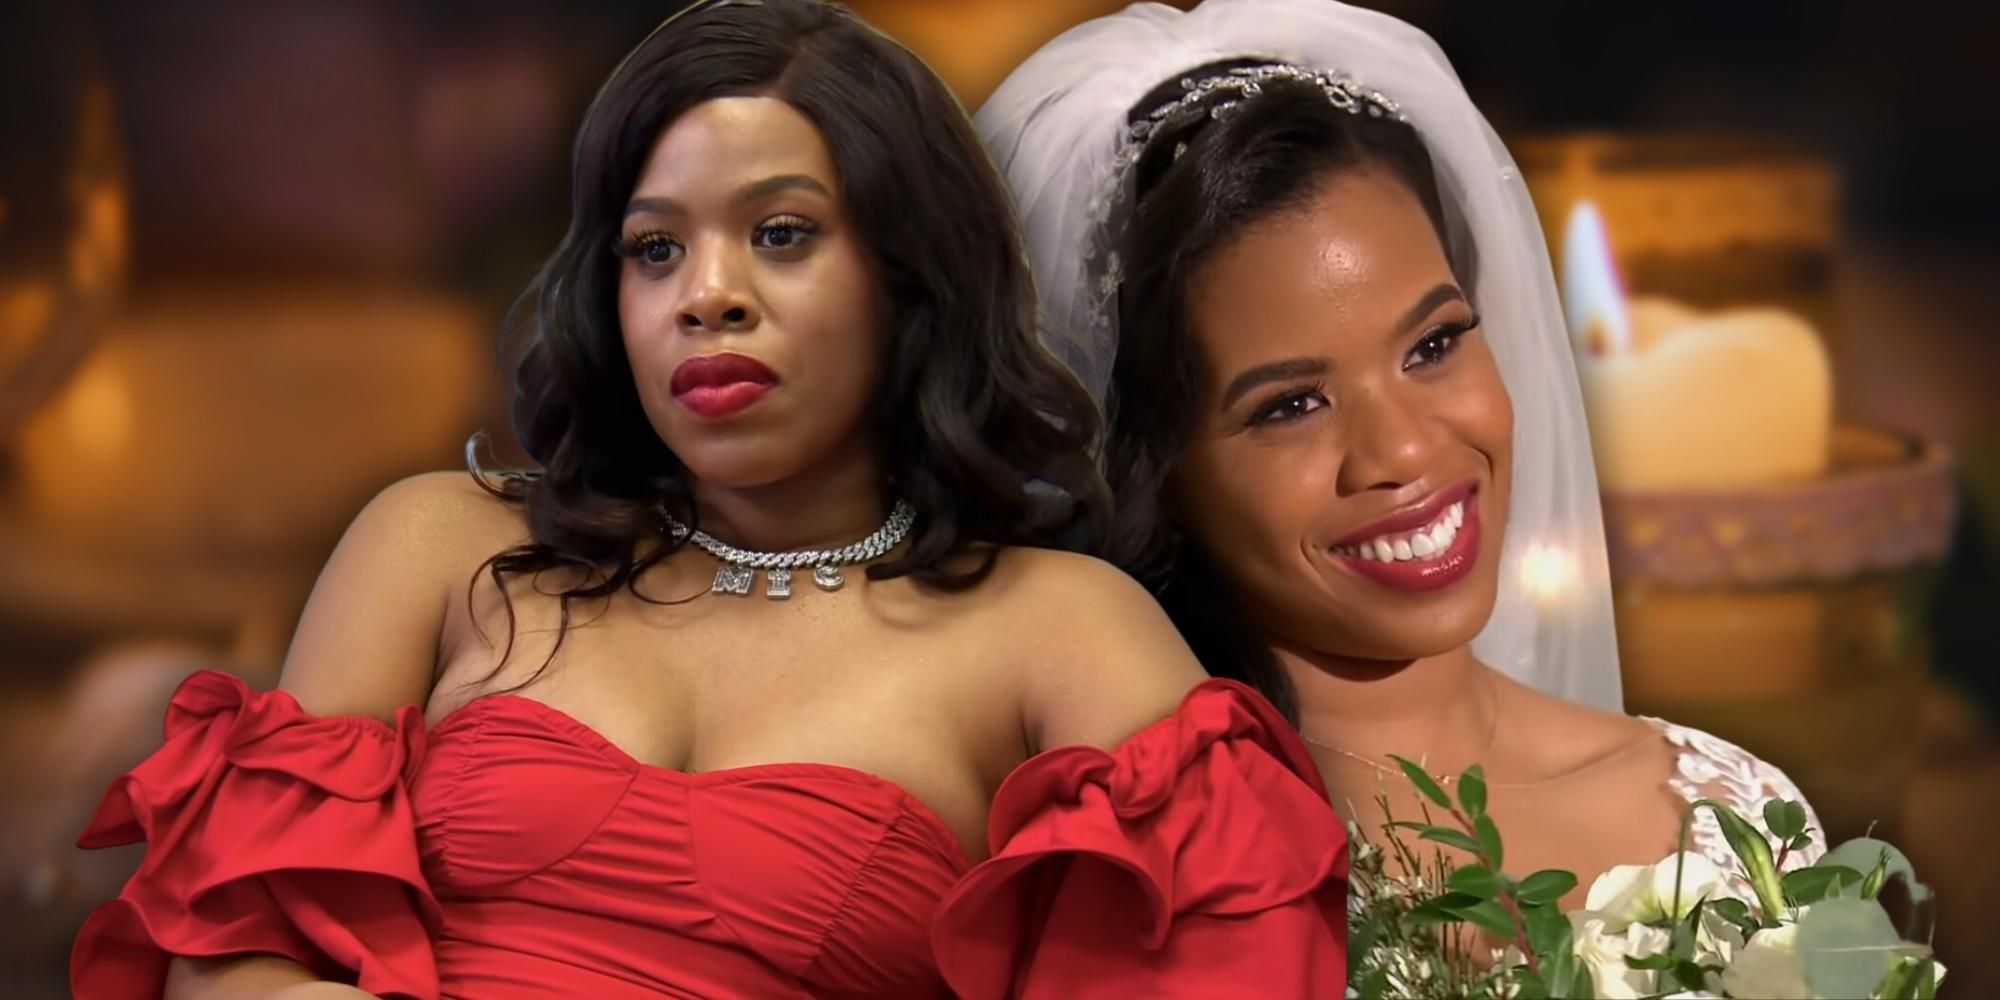 Married At First Sight season 13's Michaela 